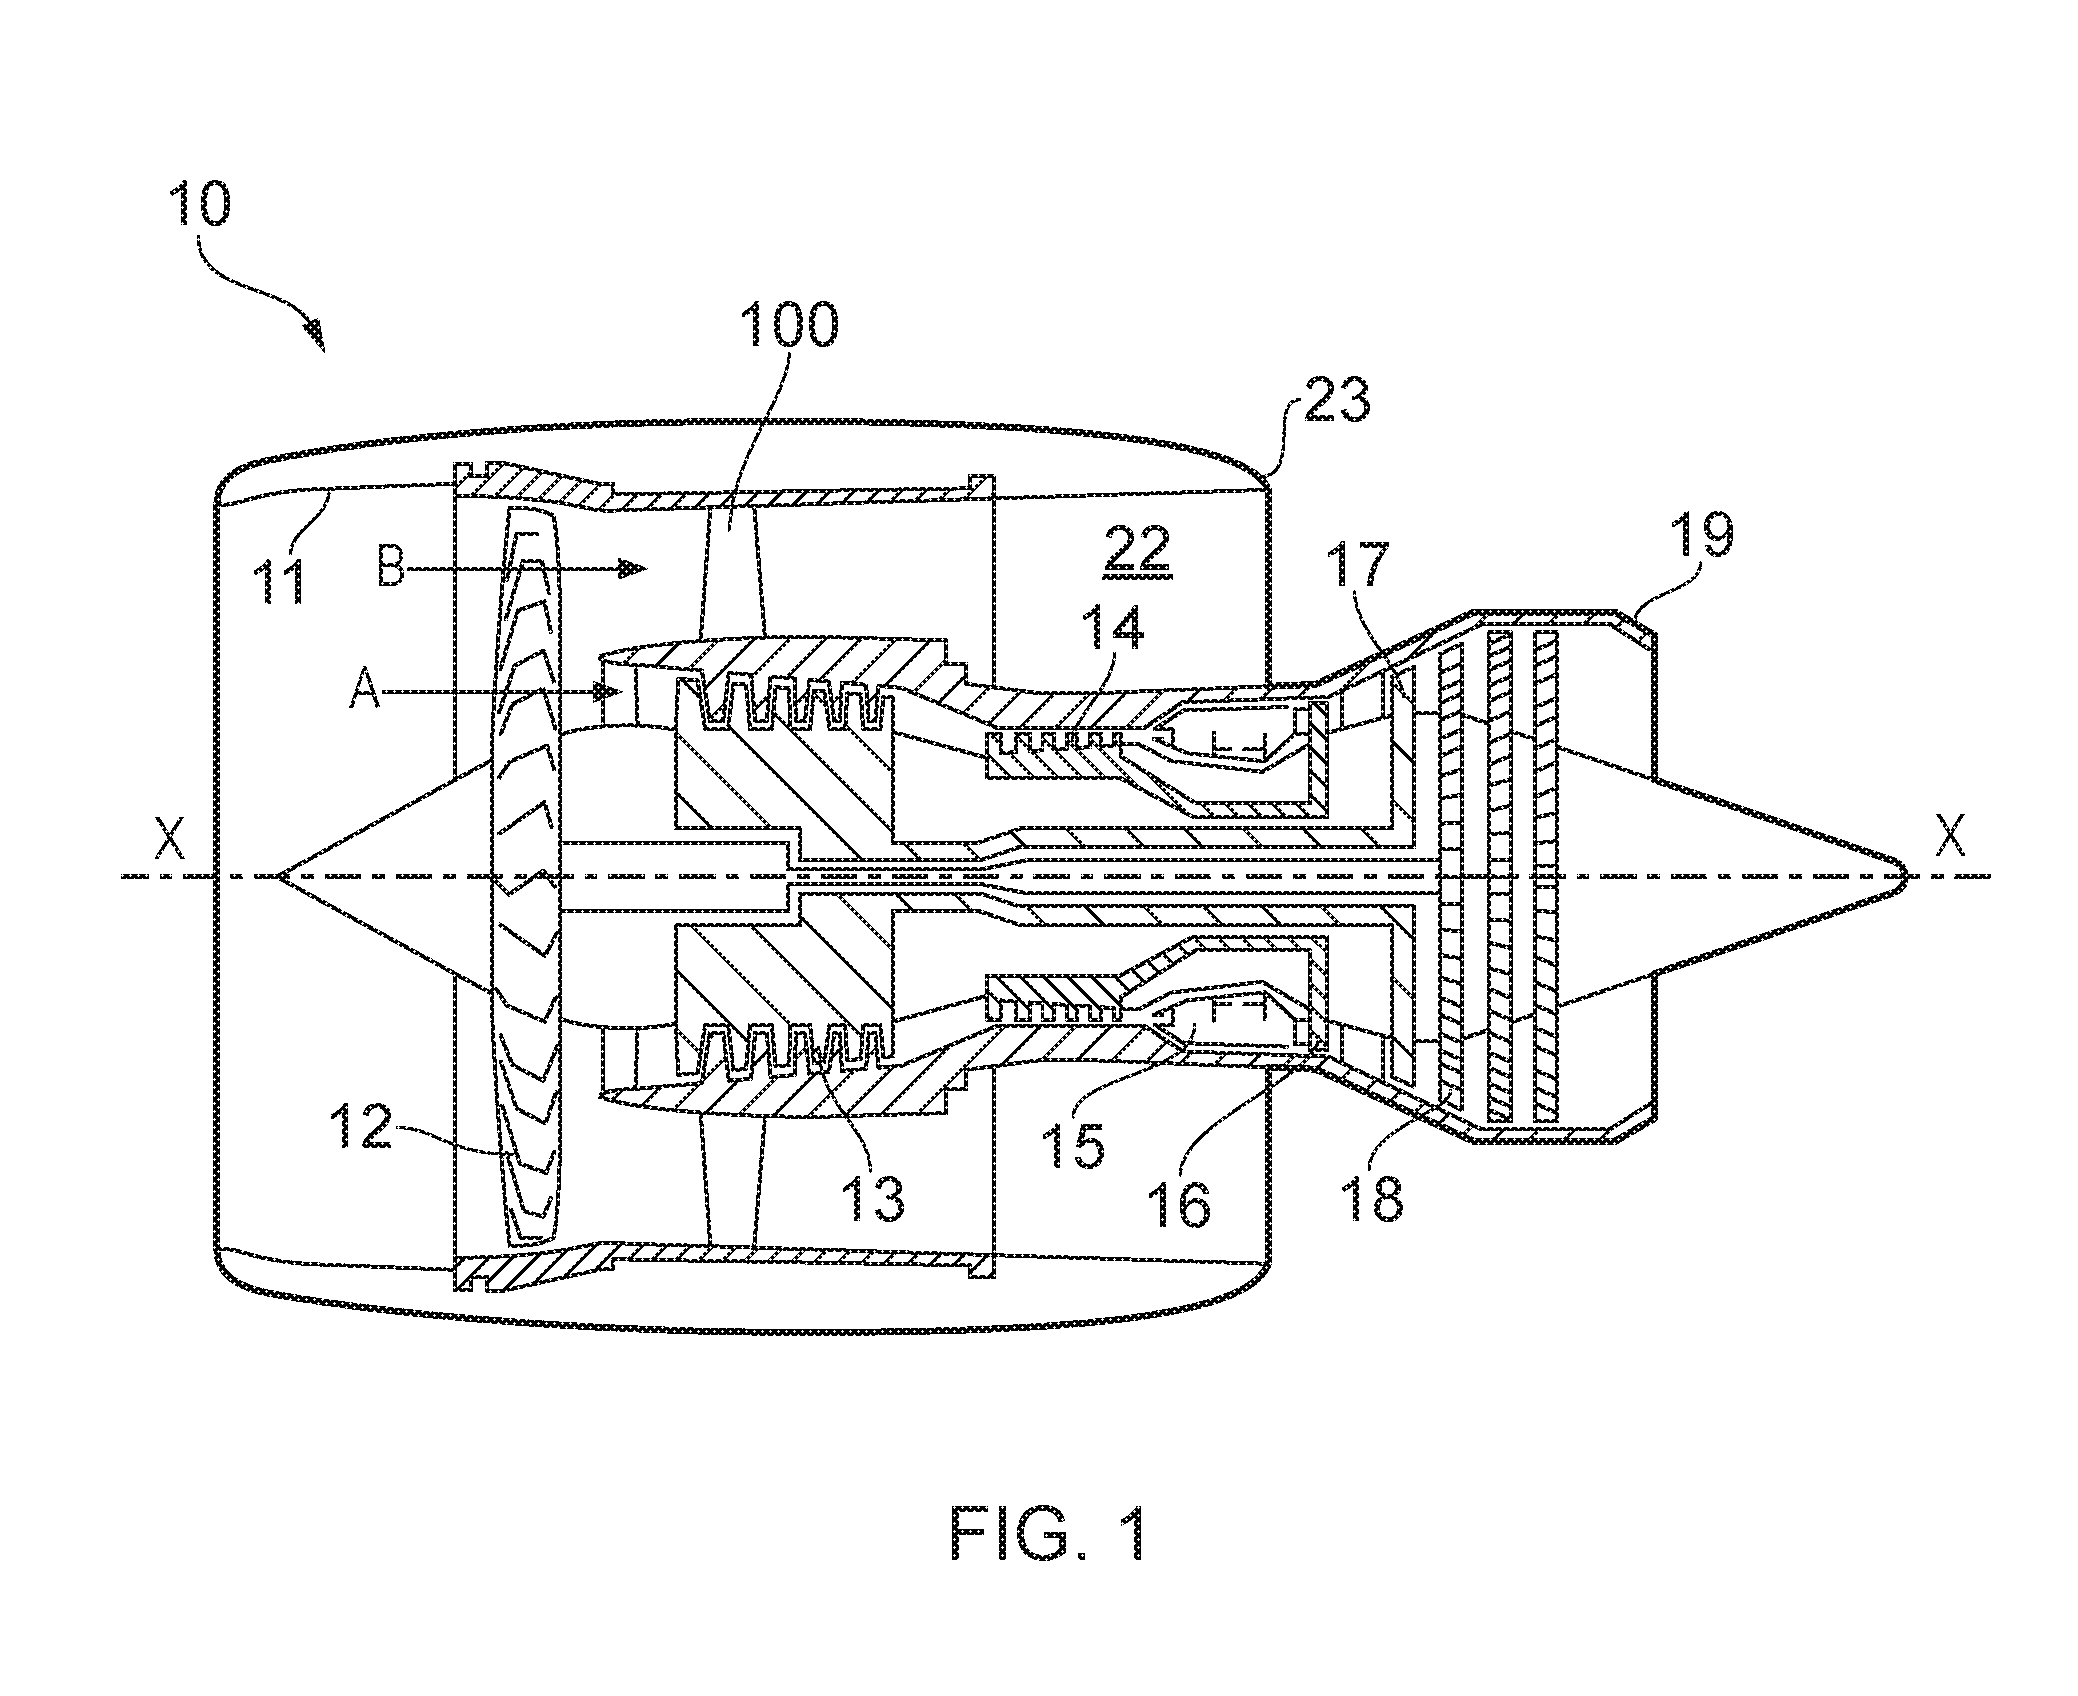 Manufacture of a hollow aerofoil